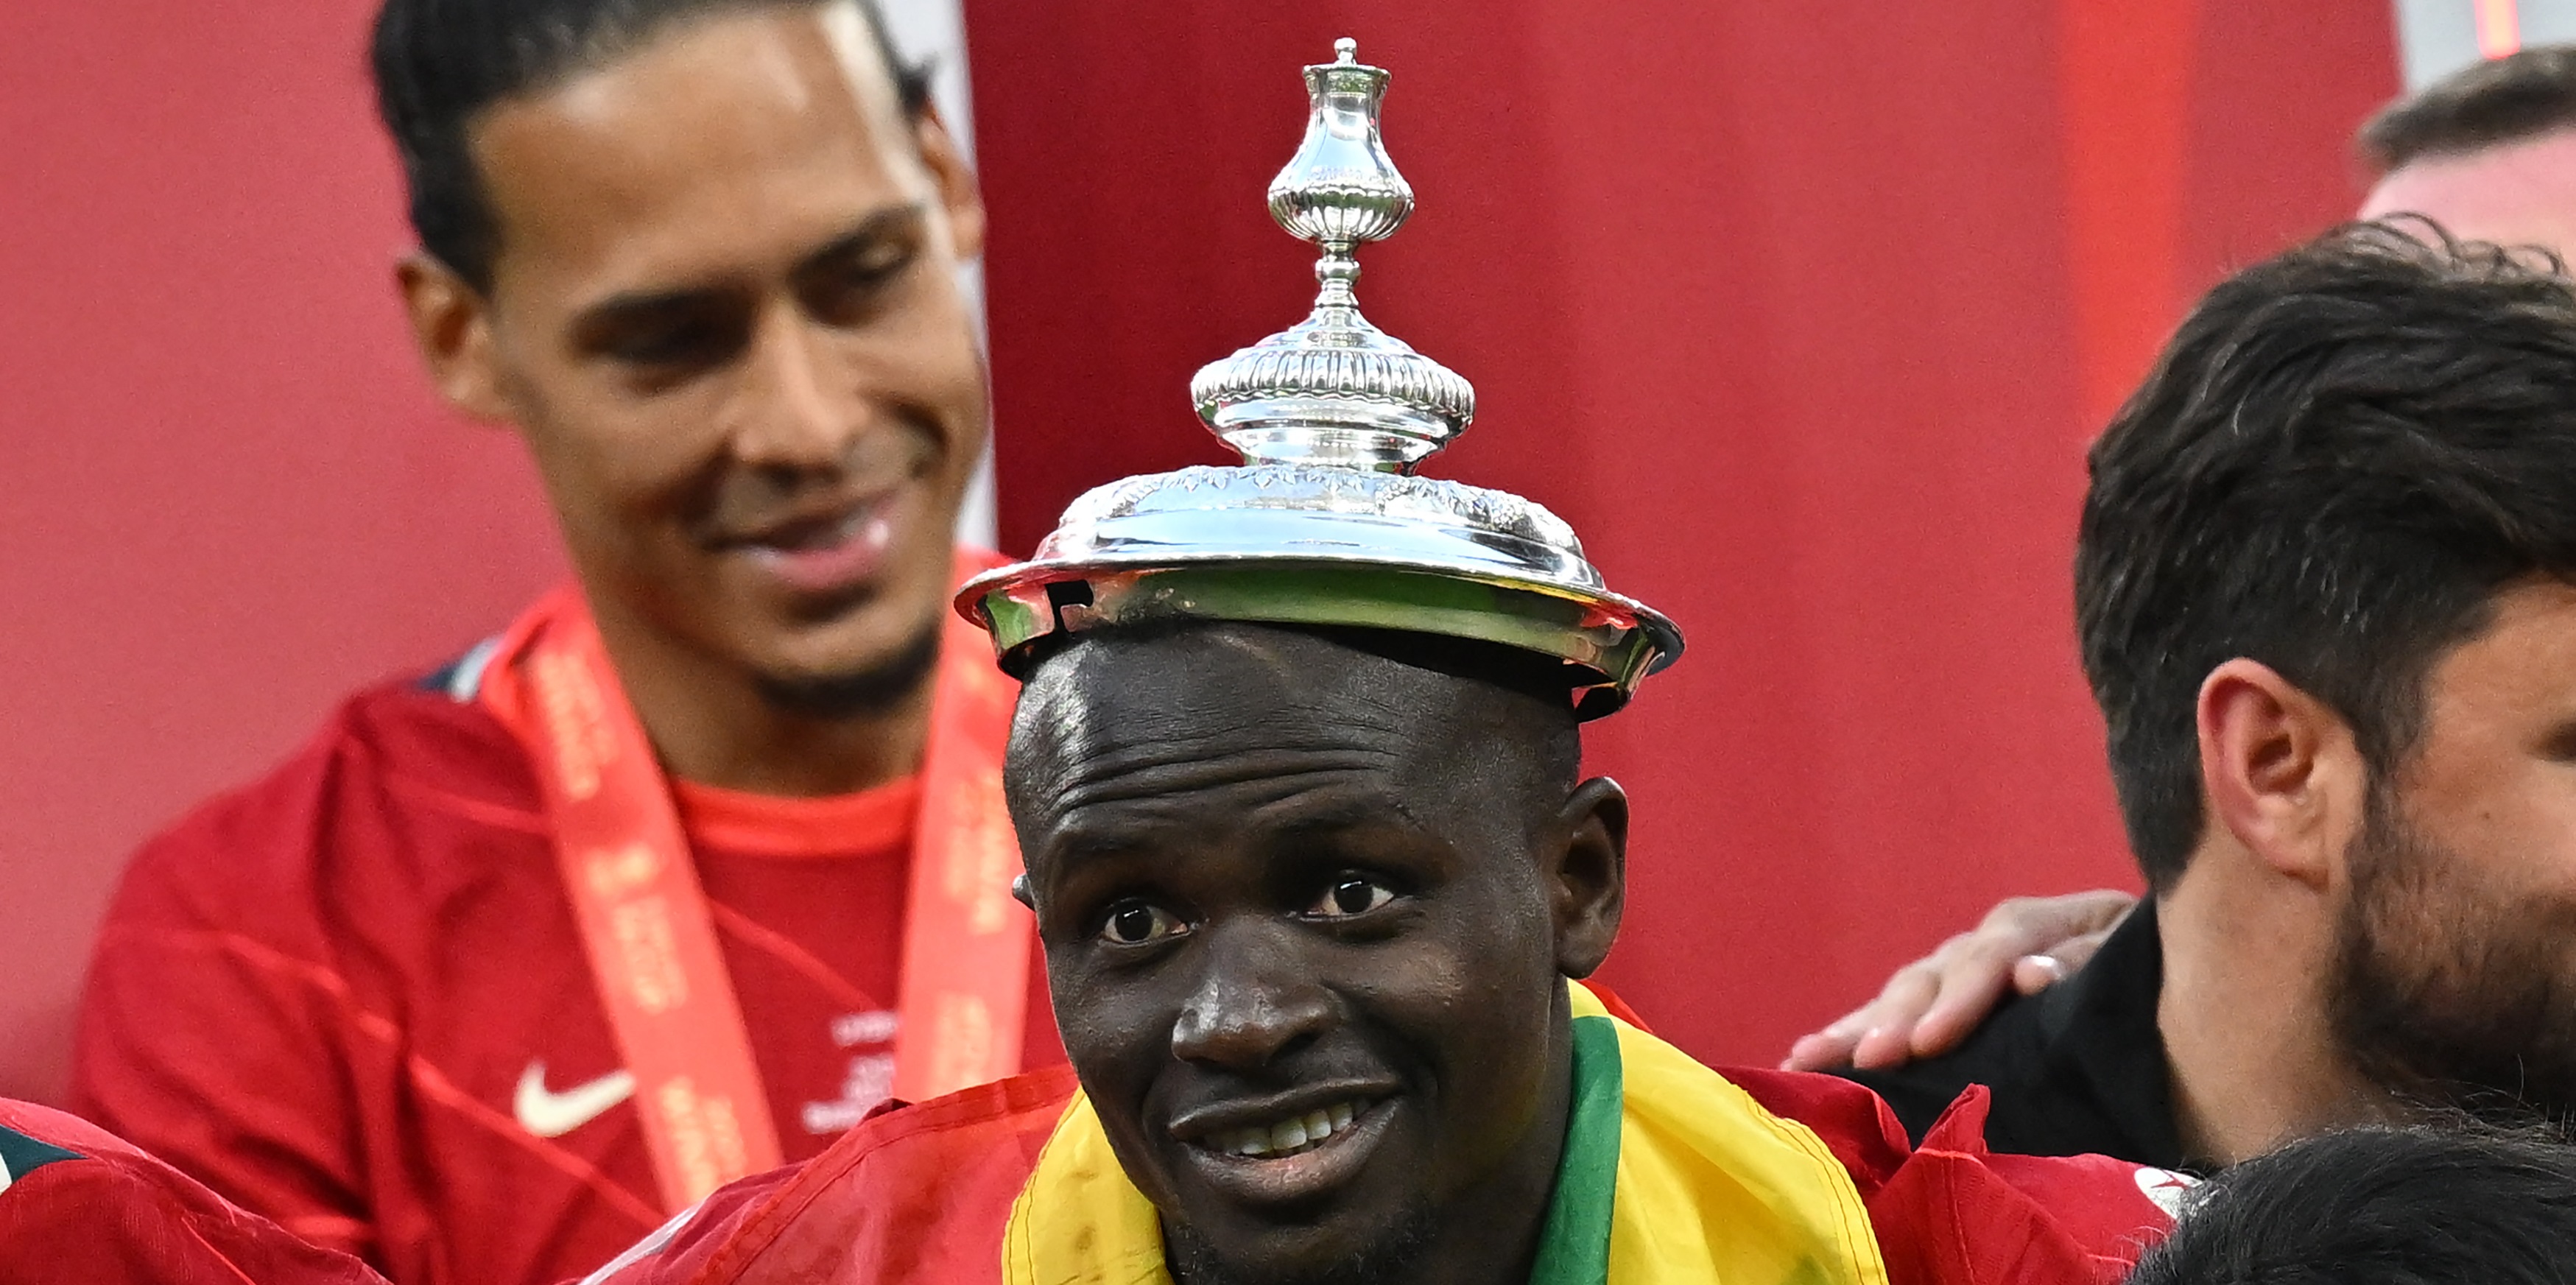 ‘Just beautiful’ – Sadio Mane reflects on his time at Liverpool and winning one trophy in particular